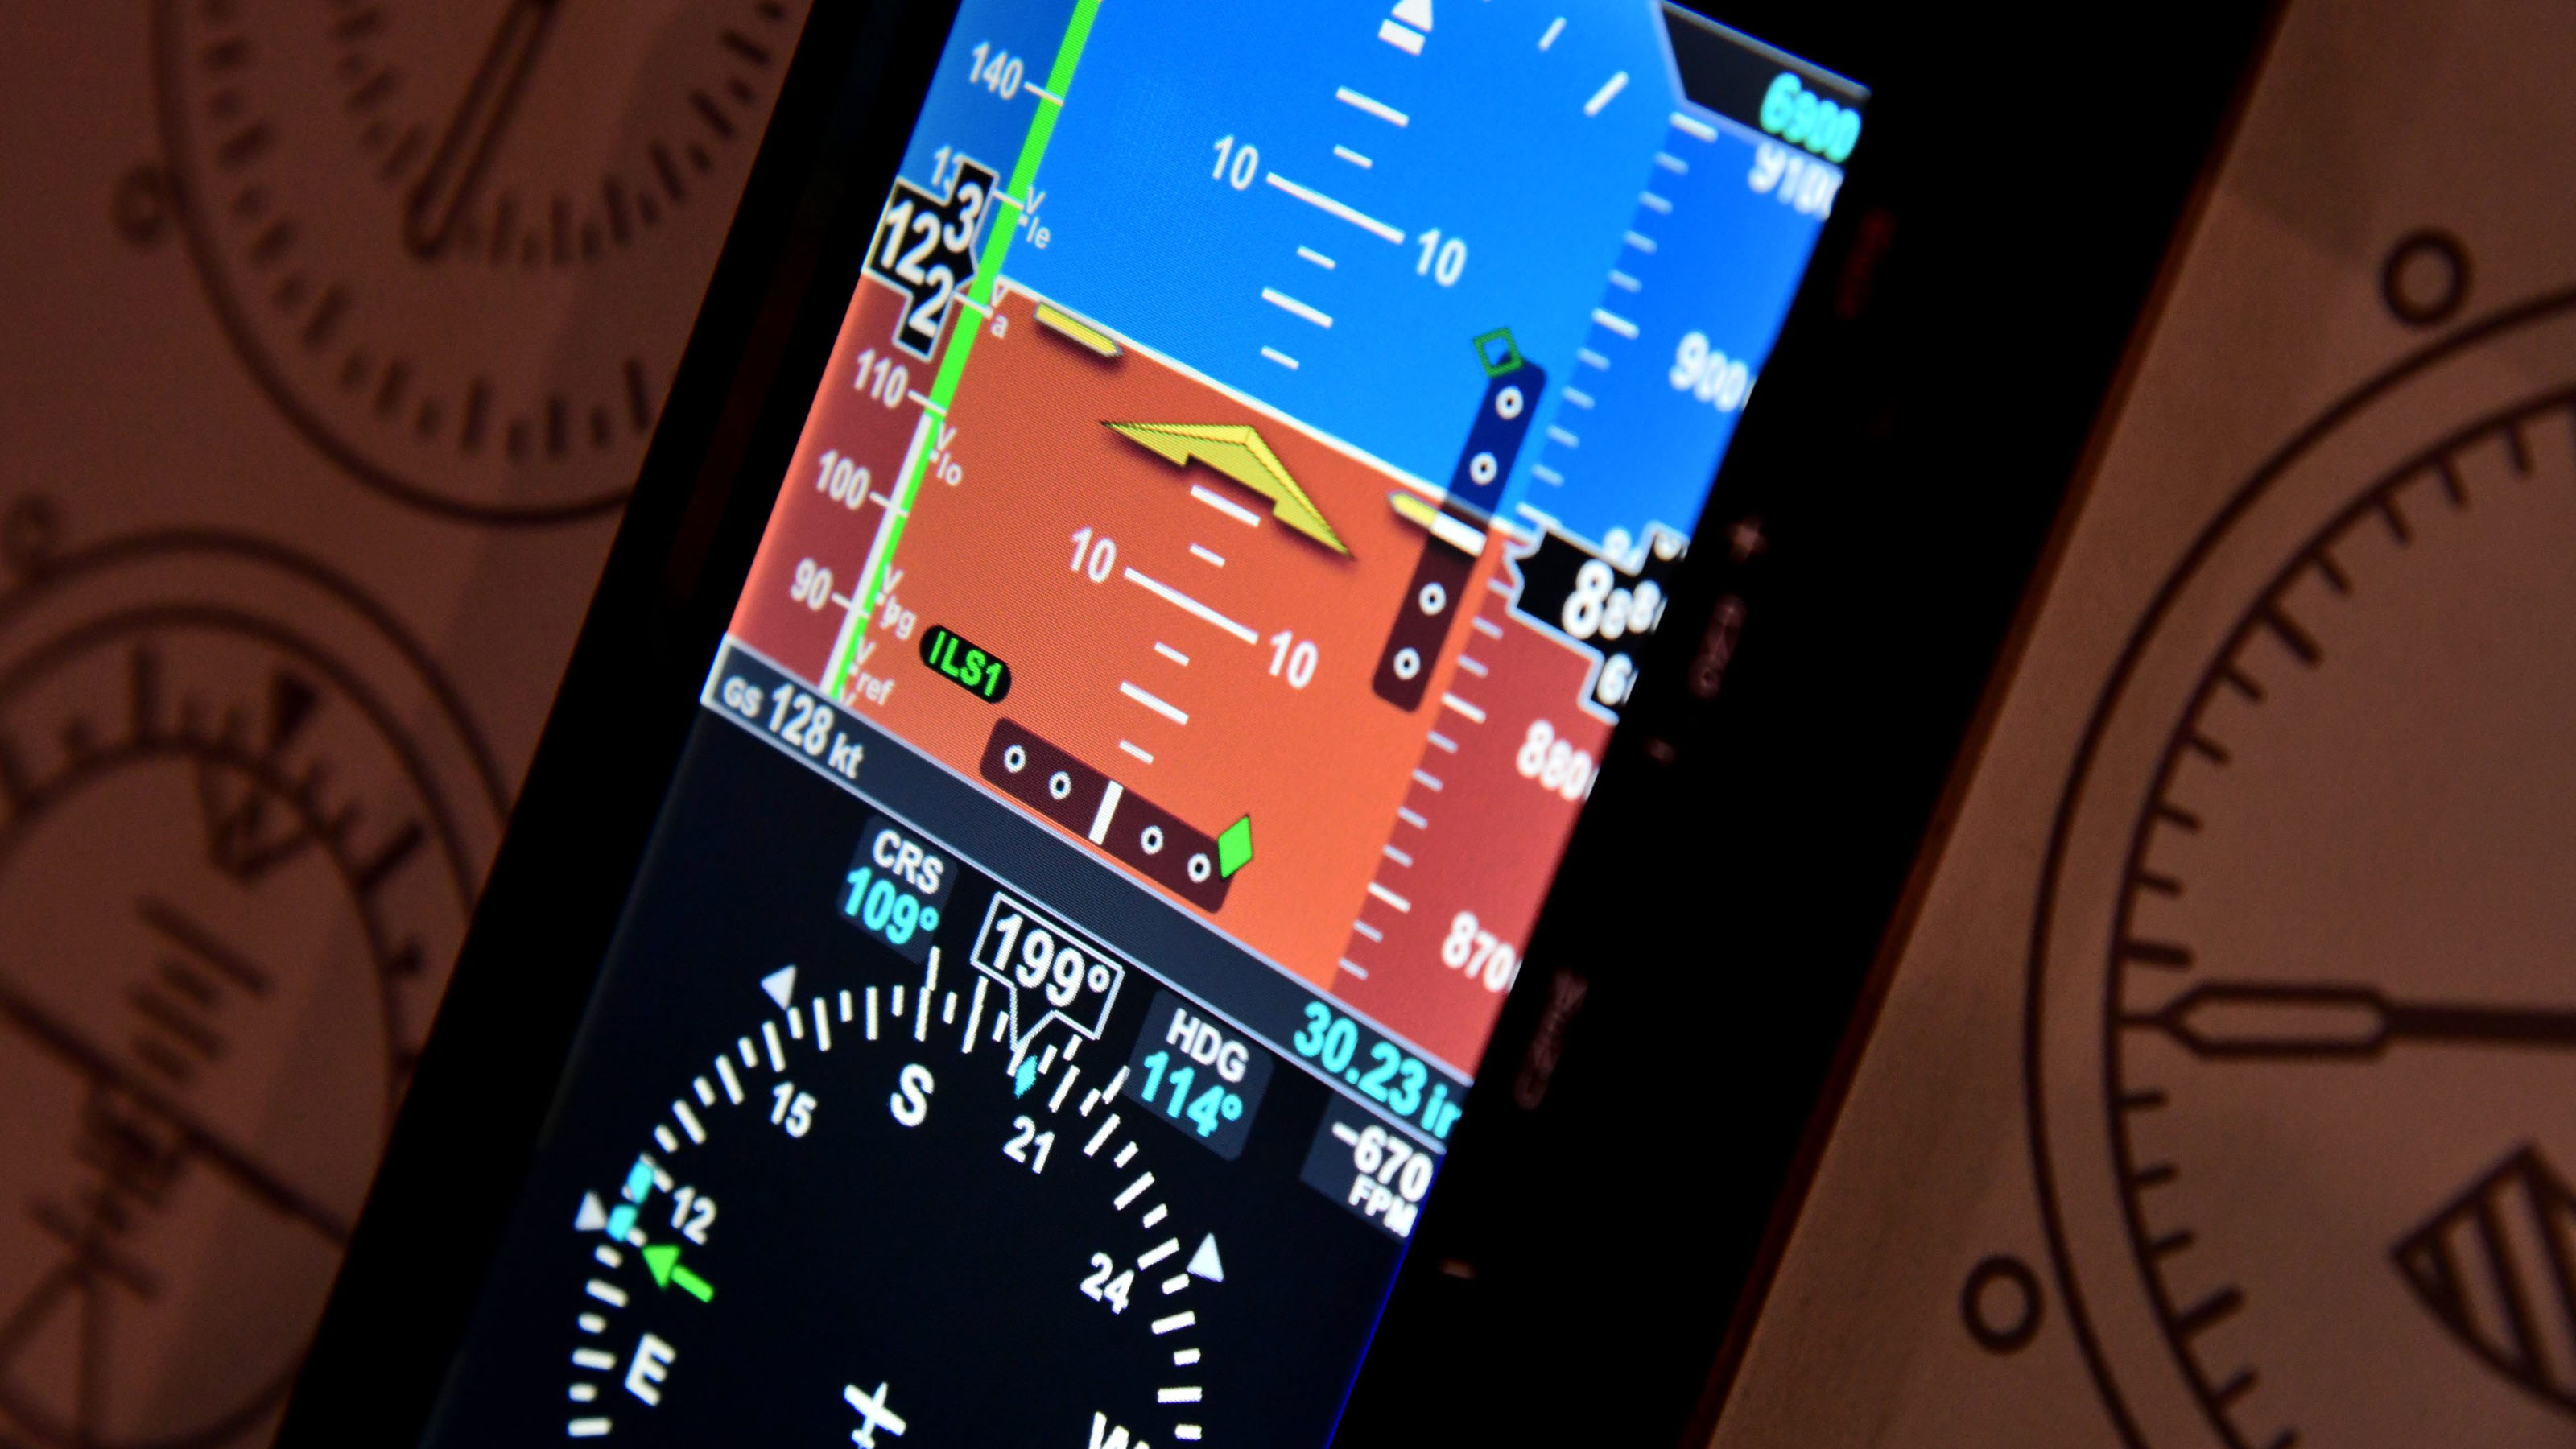 Aspen Avionics introduced the Evolution E5 Dual Electronic Flight Instrument at the Aircraft Electronics Association convention in Las Vegas on Mar. 26. STCed instead of TSOed, the capable unit lists for $4,995 and is fully upgradable. Photo by Mike Collins.